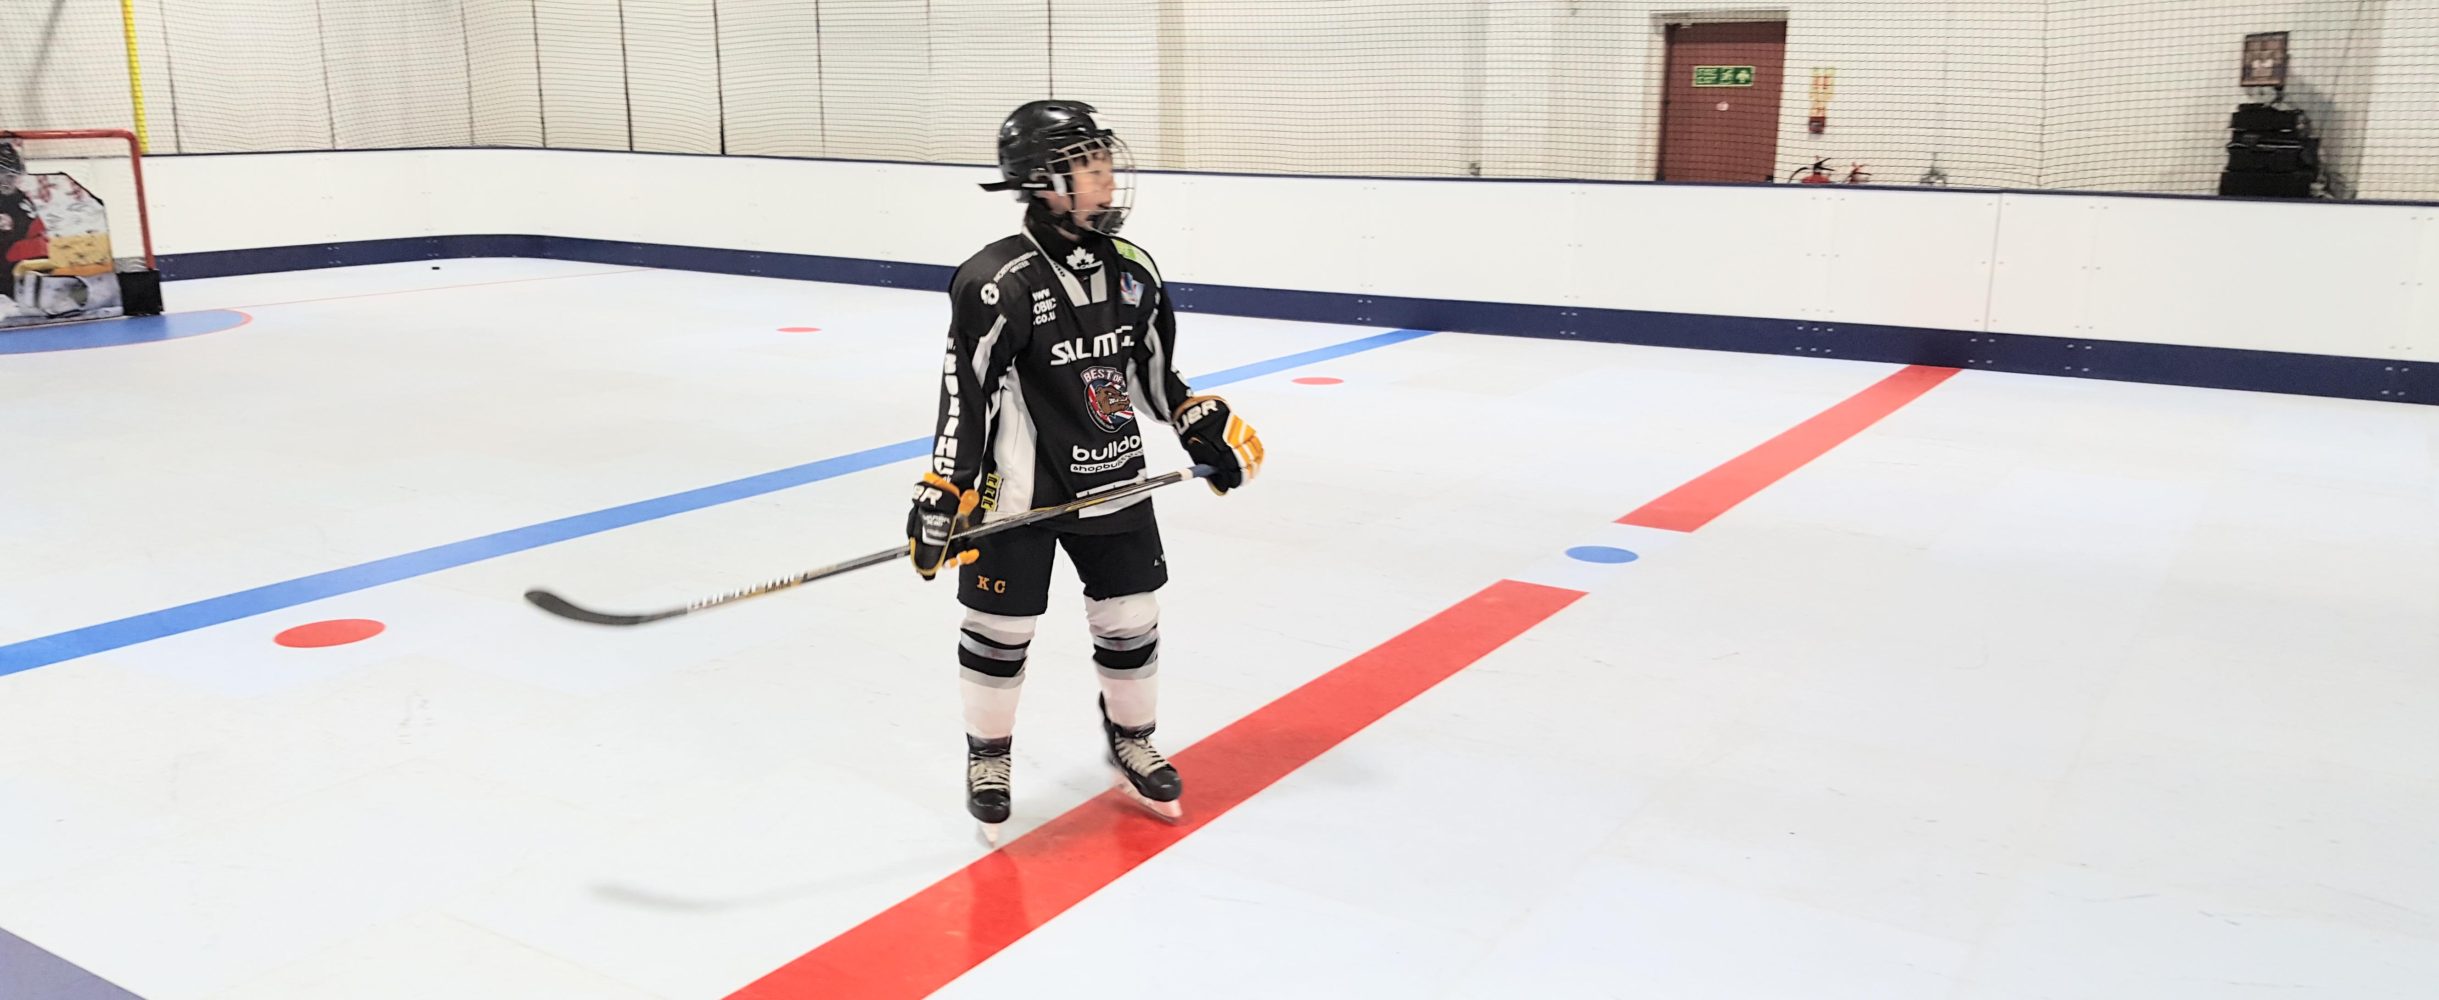 Is Synthetic Ice Safe to Skate On?